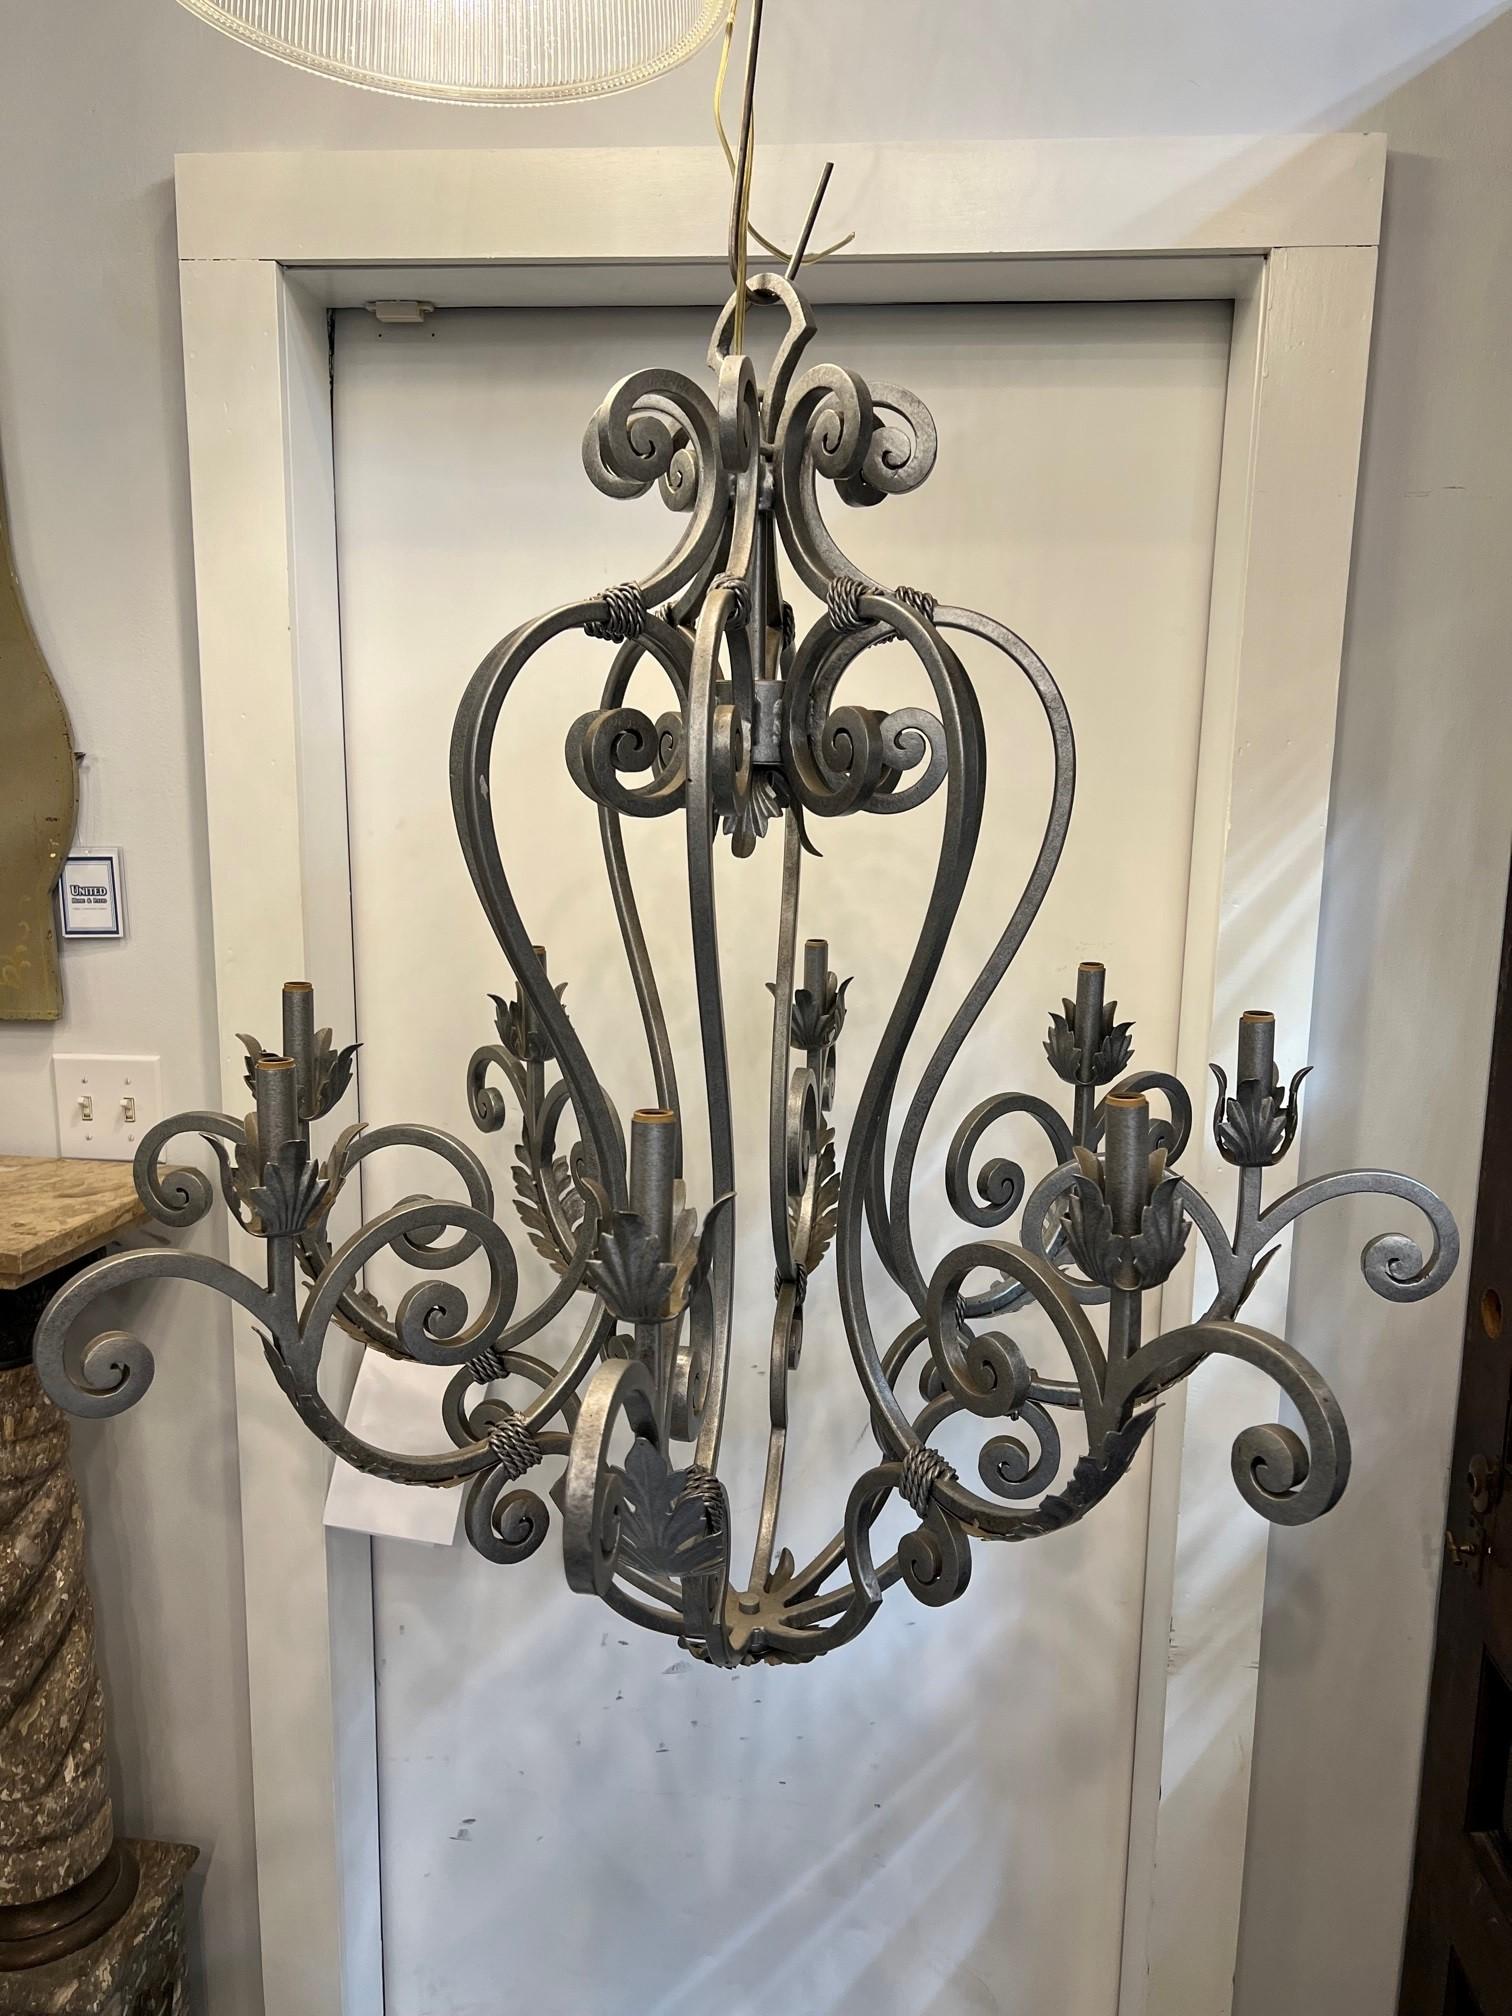 Beautiful decorative iron chandelier with eight lights. Hand forged with curved arms and leaves with a twisted rope design. A great piece to compliment any interior, would look great over a large table or Island, it's a nice size. Has a silver